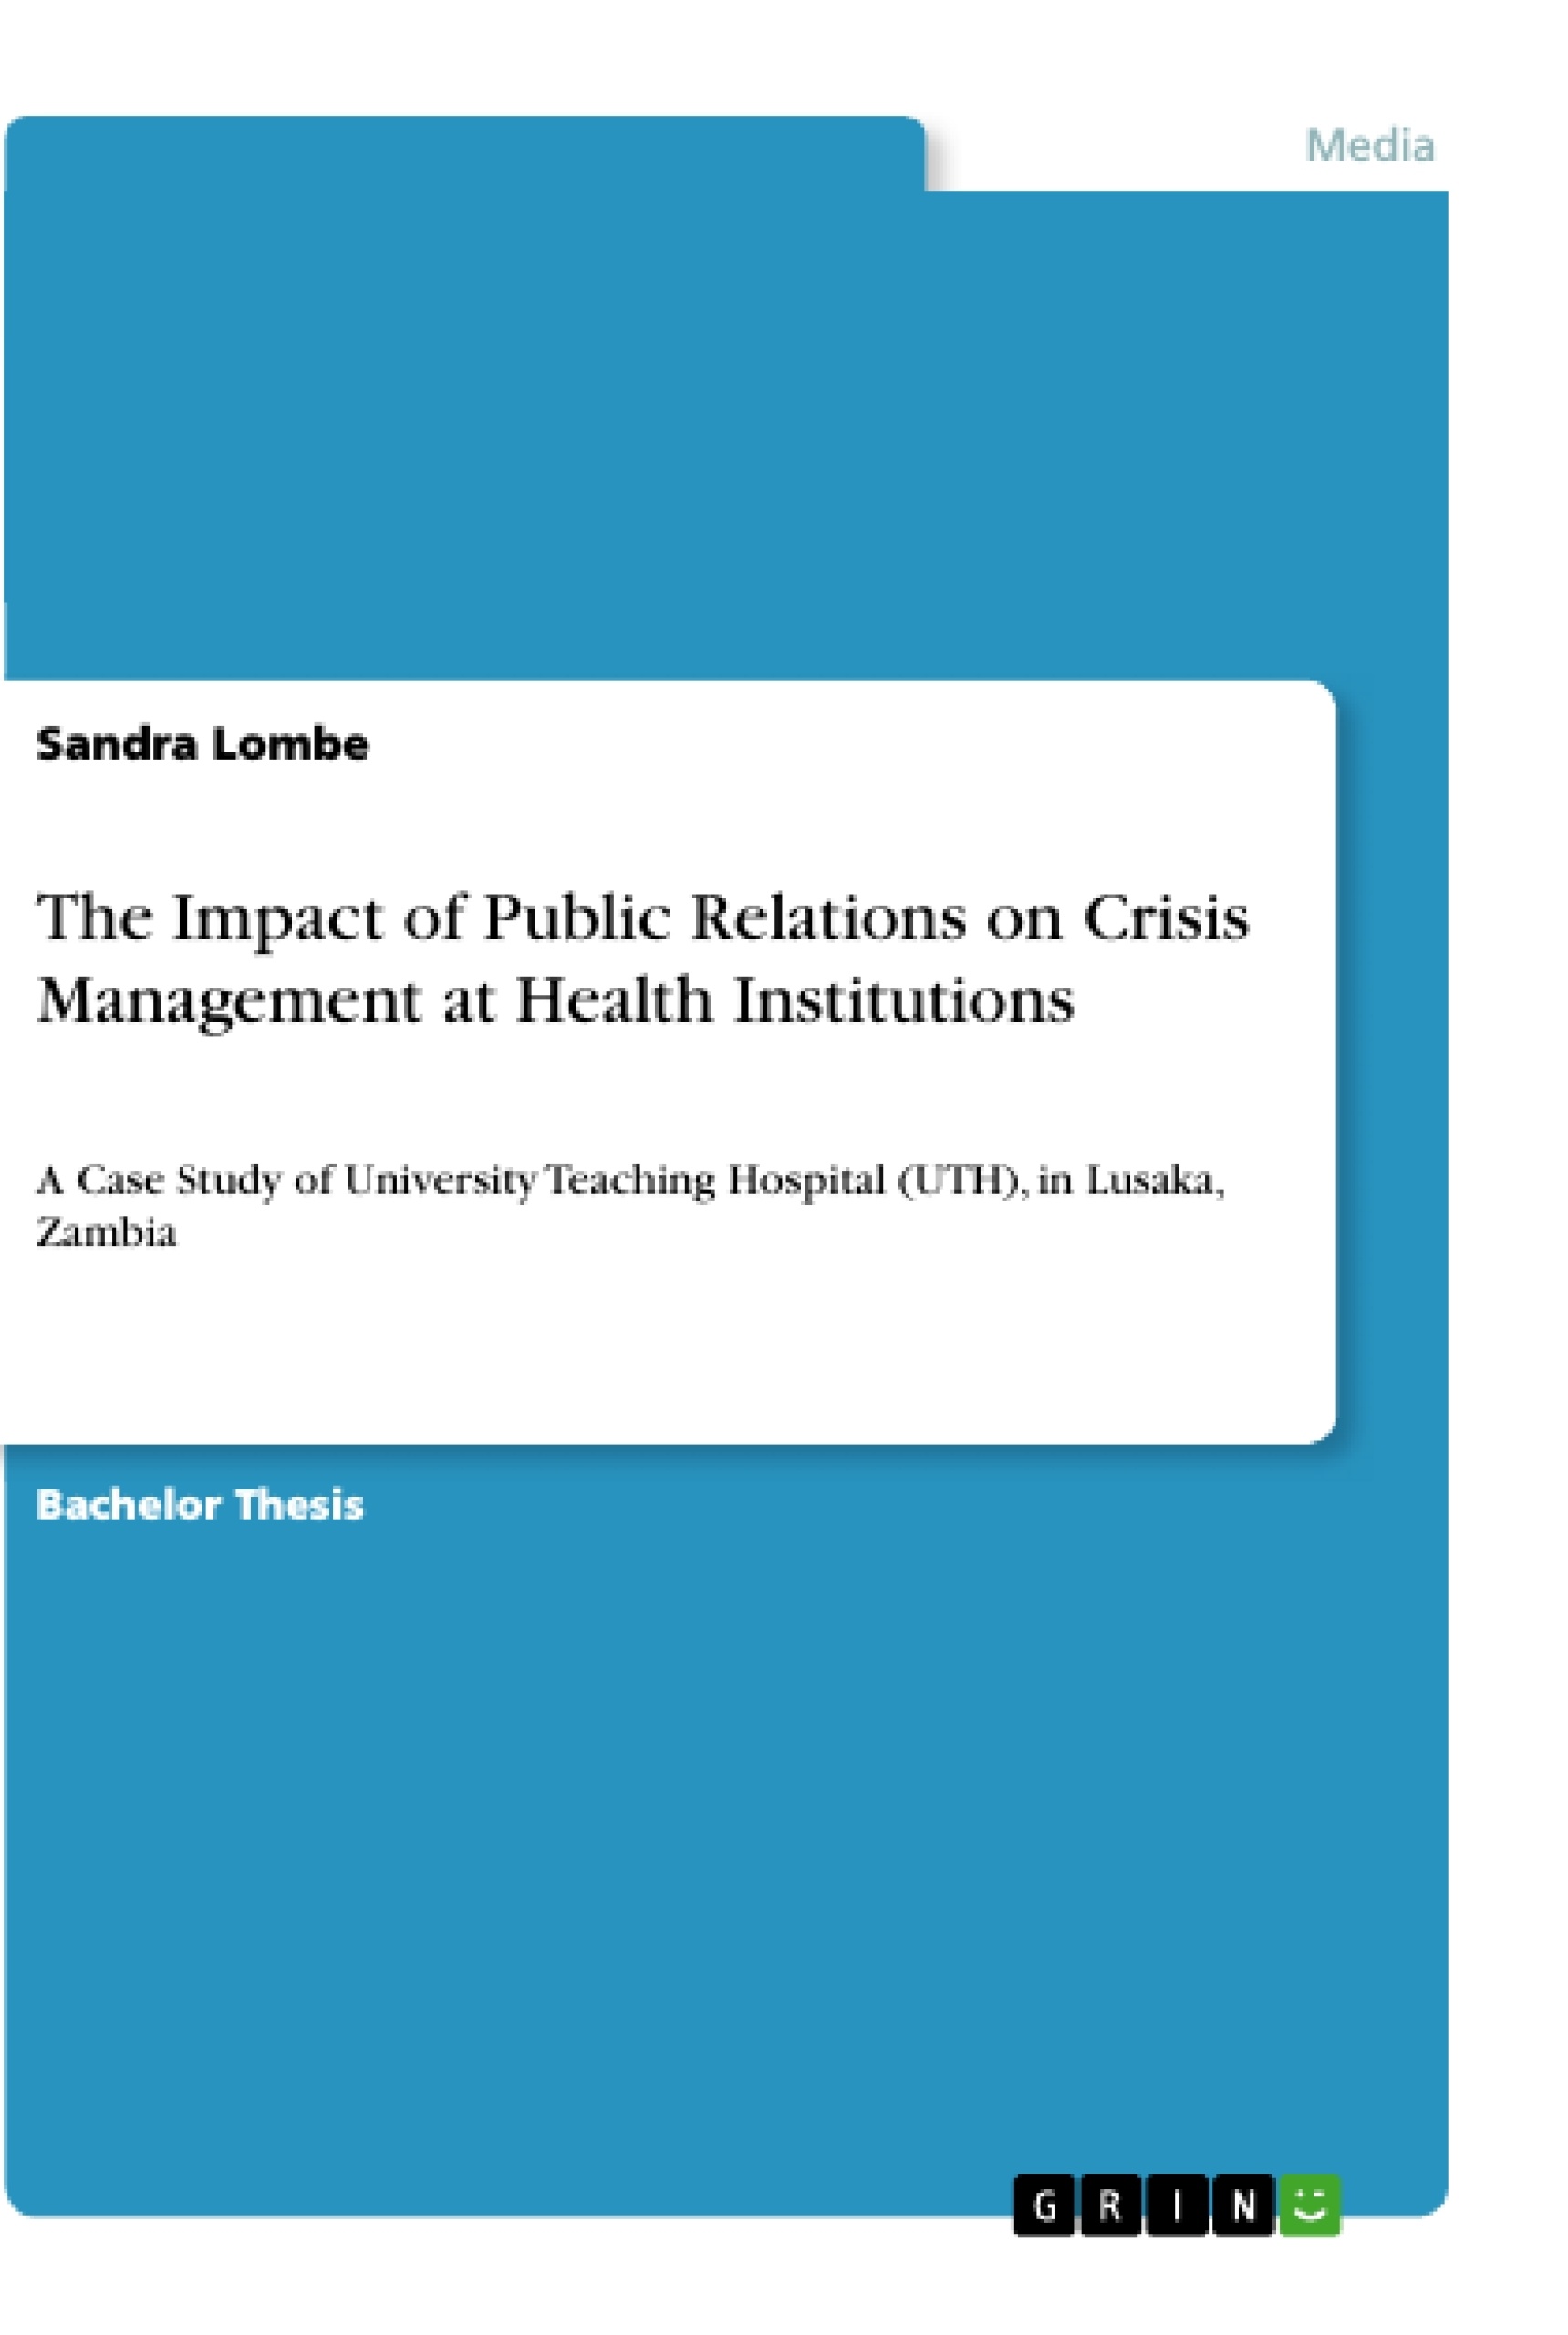 Title: The Impact of Public Relations on Crisis Management  at Health Institutions